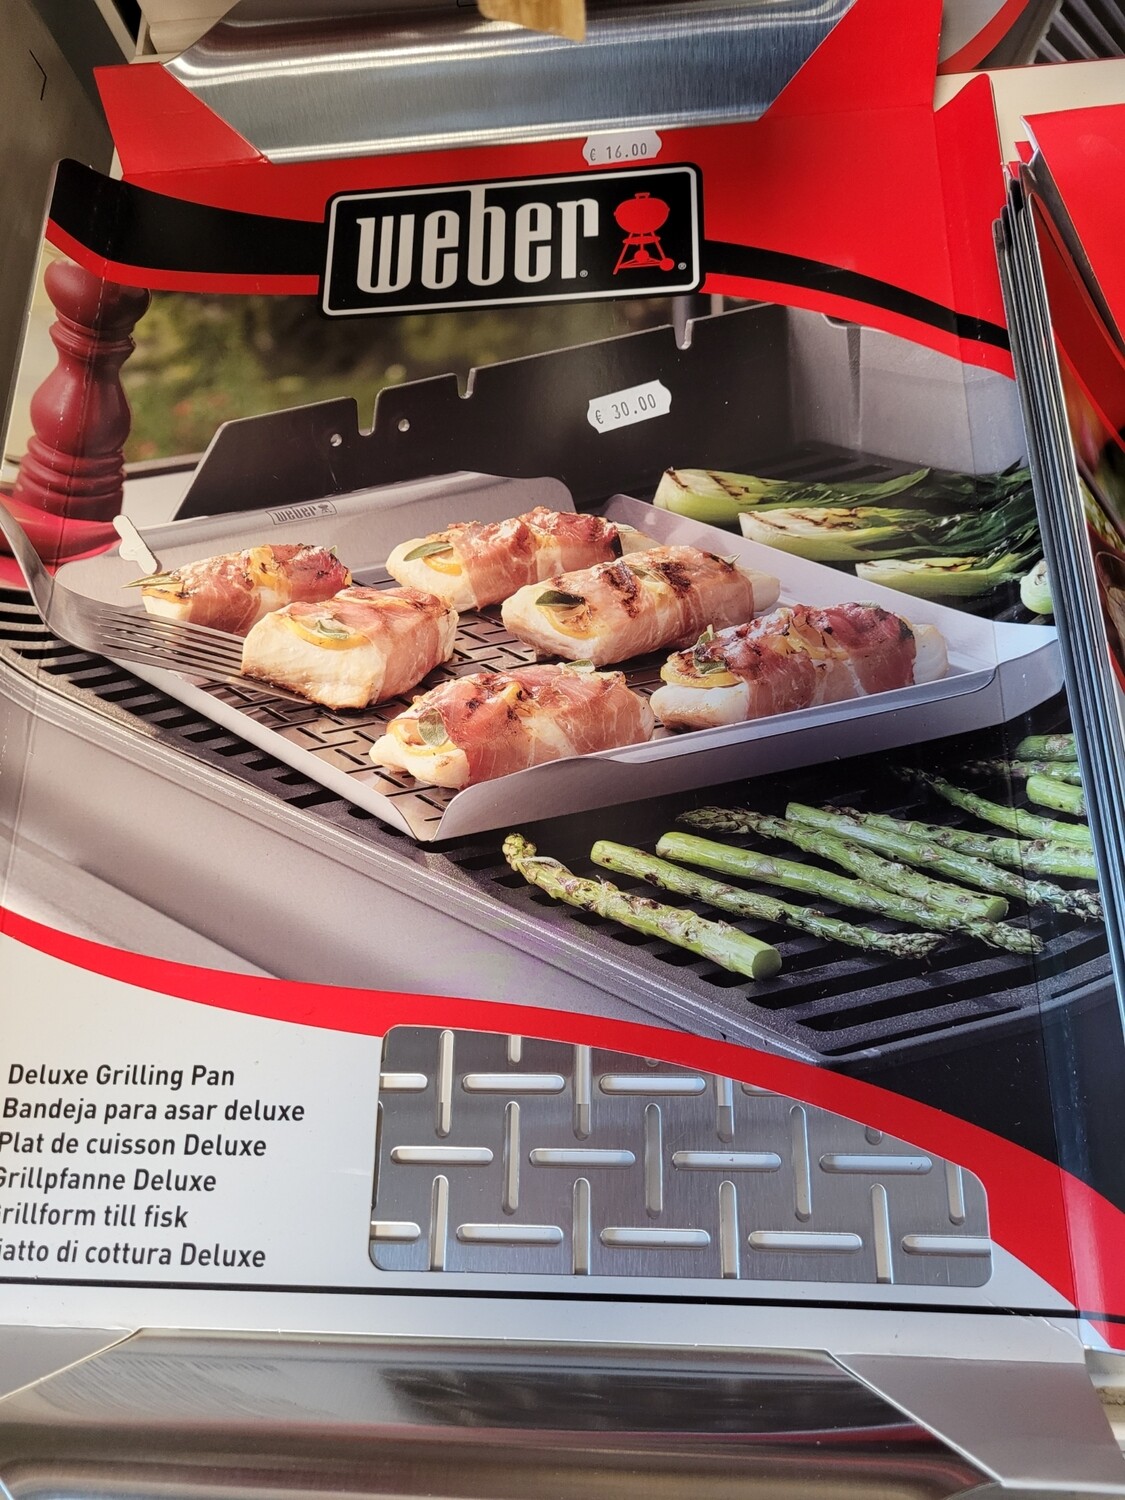 DELUXE GRILLING PAN